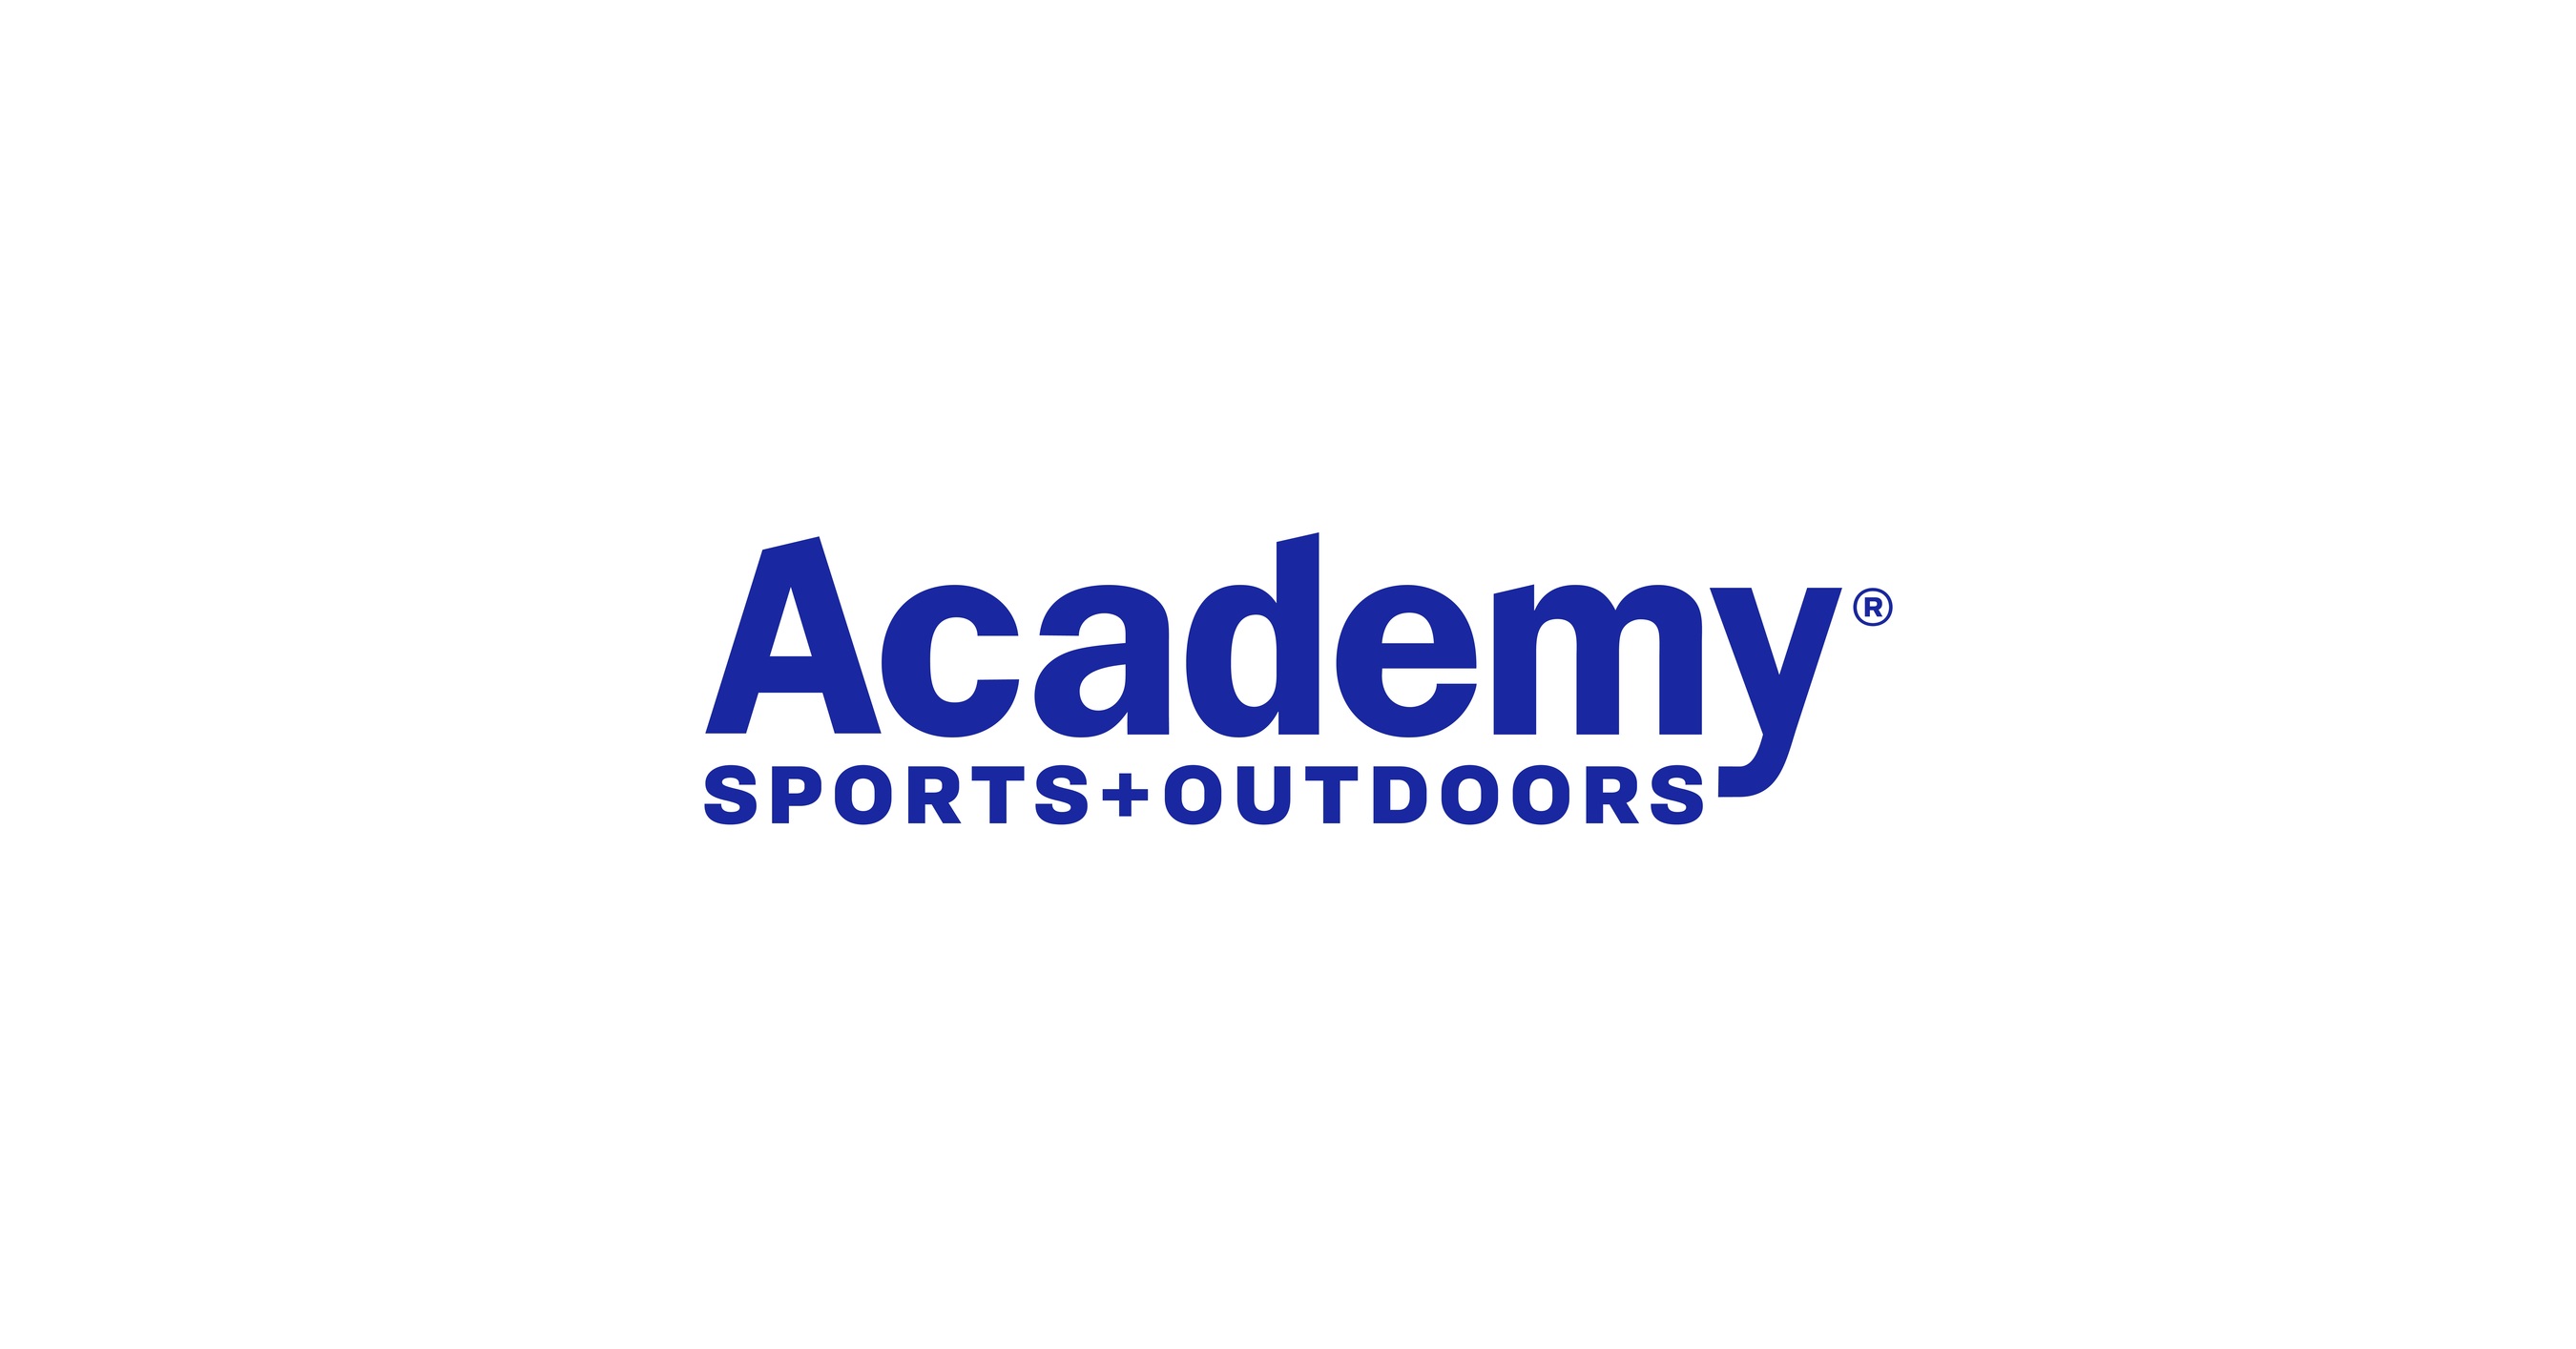 Academy Sports + Outdoors Announces Appointment of Chris Turner to Board of Directors